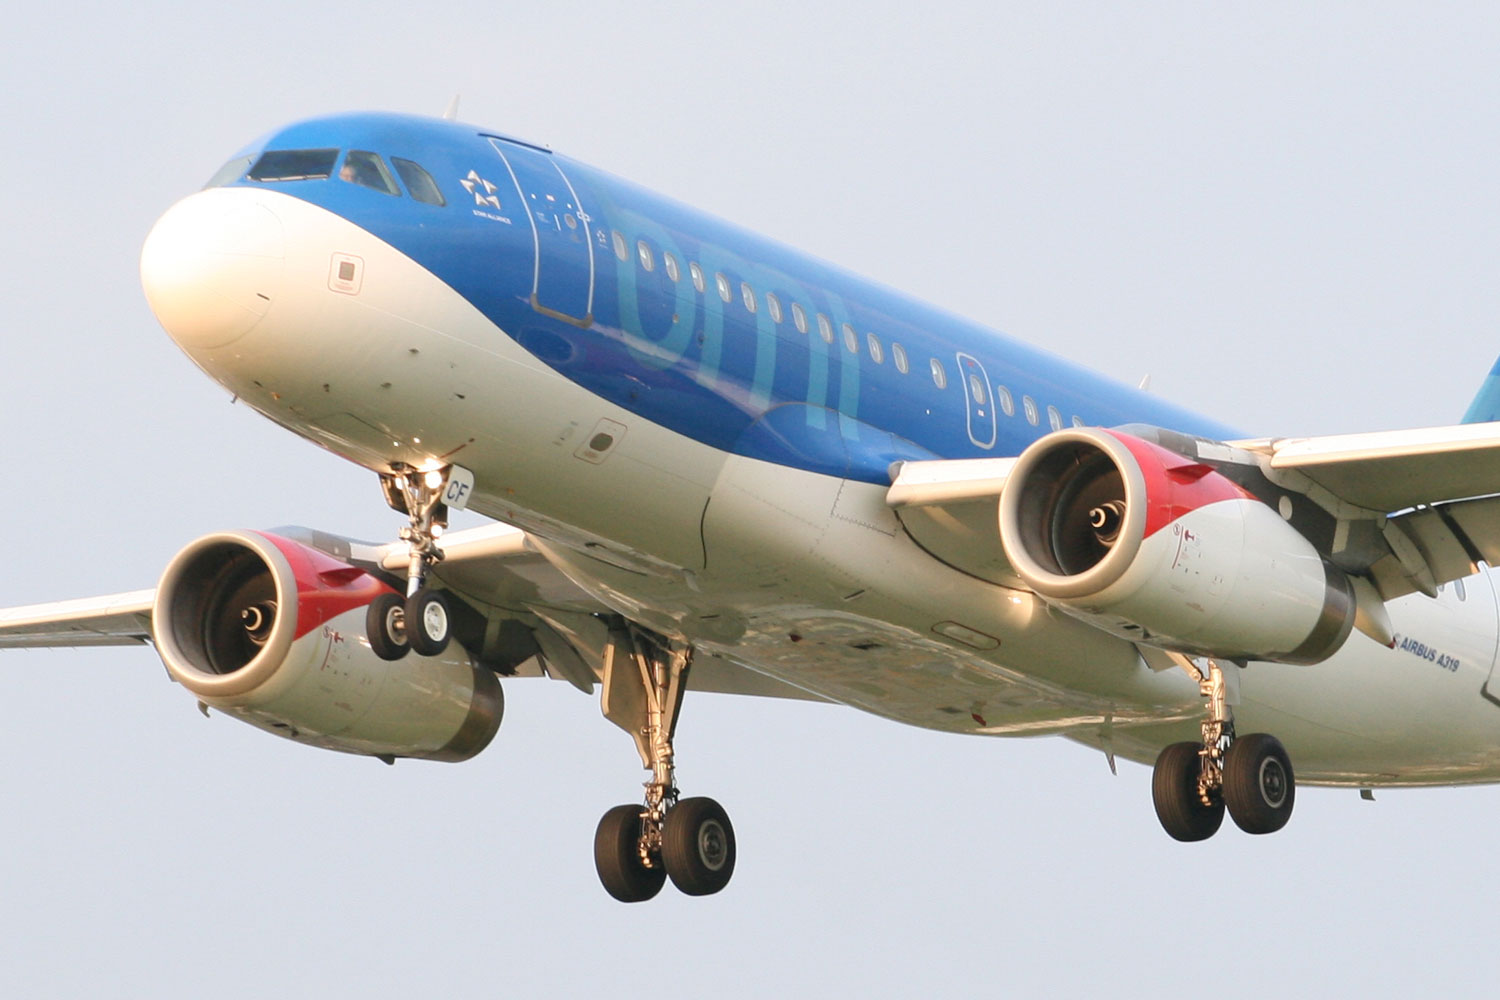 It's time for bmi British Midland to bow out - Airport Spotting